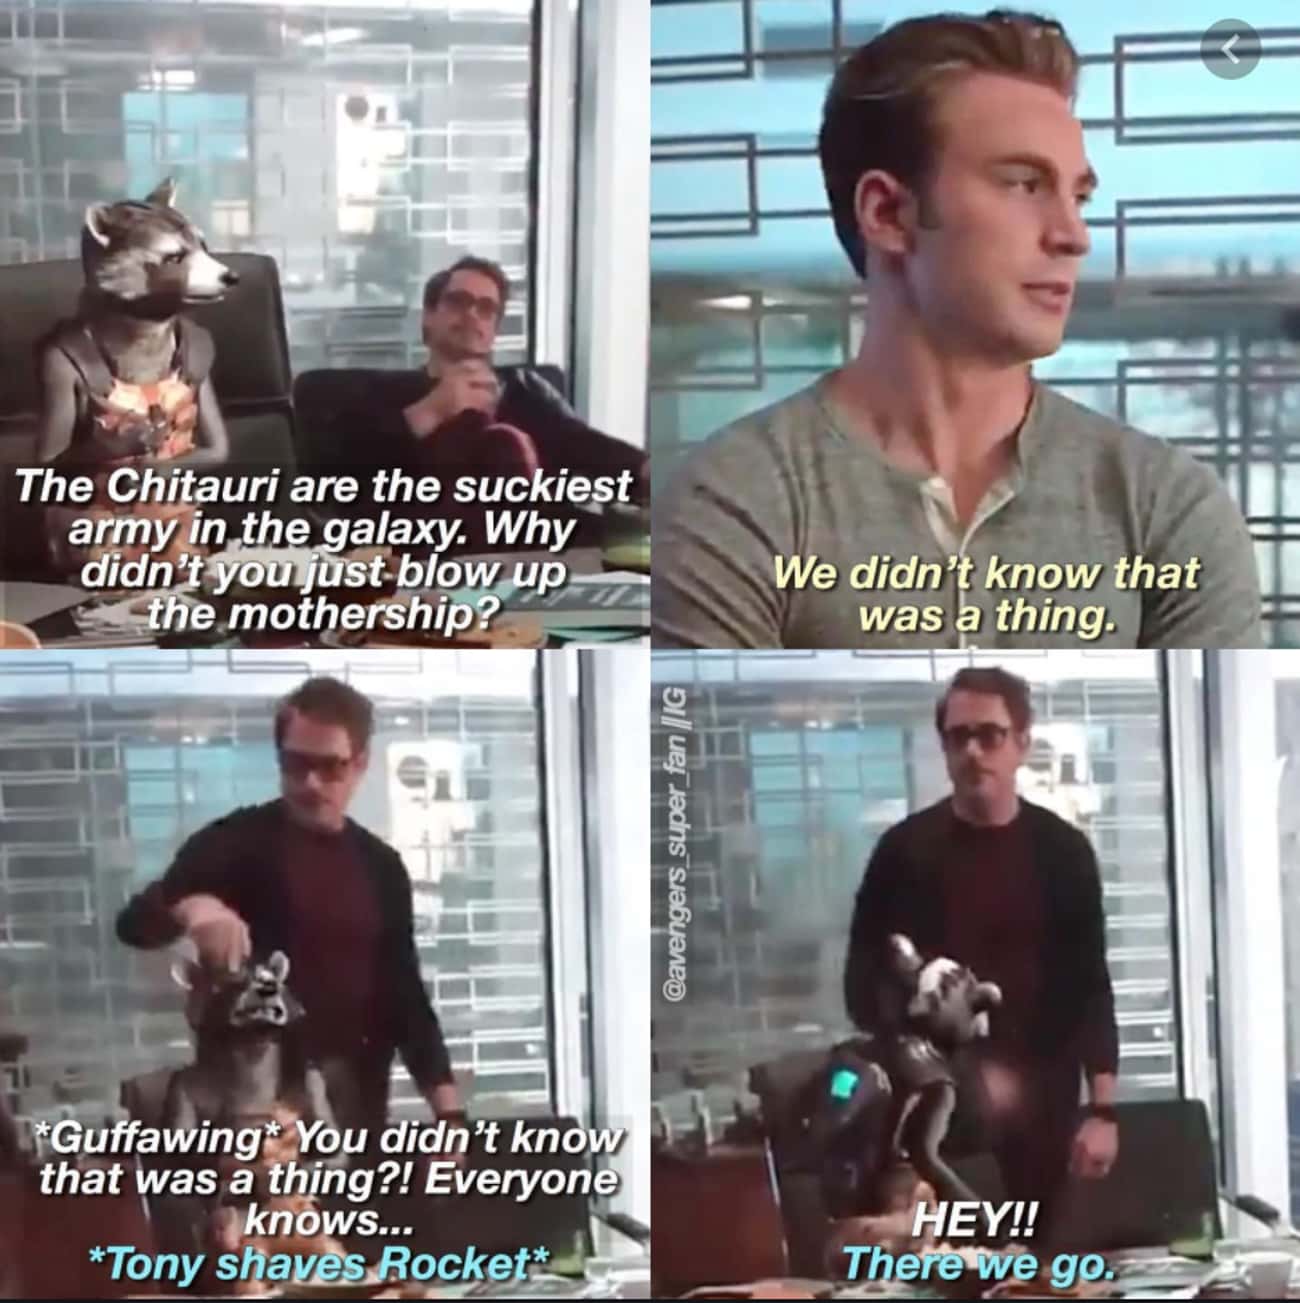 Rocket Mocks The Avengers For Taking So Long To Defeat The Chitauri (Endgame)